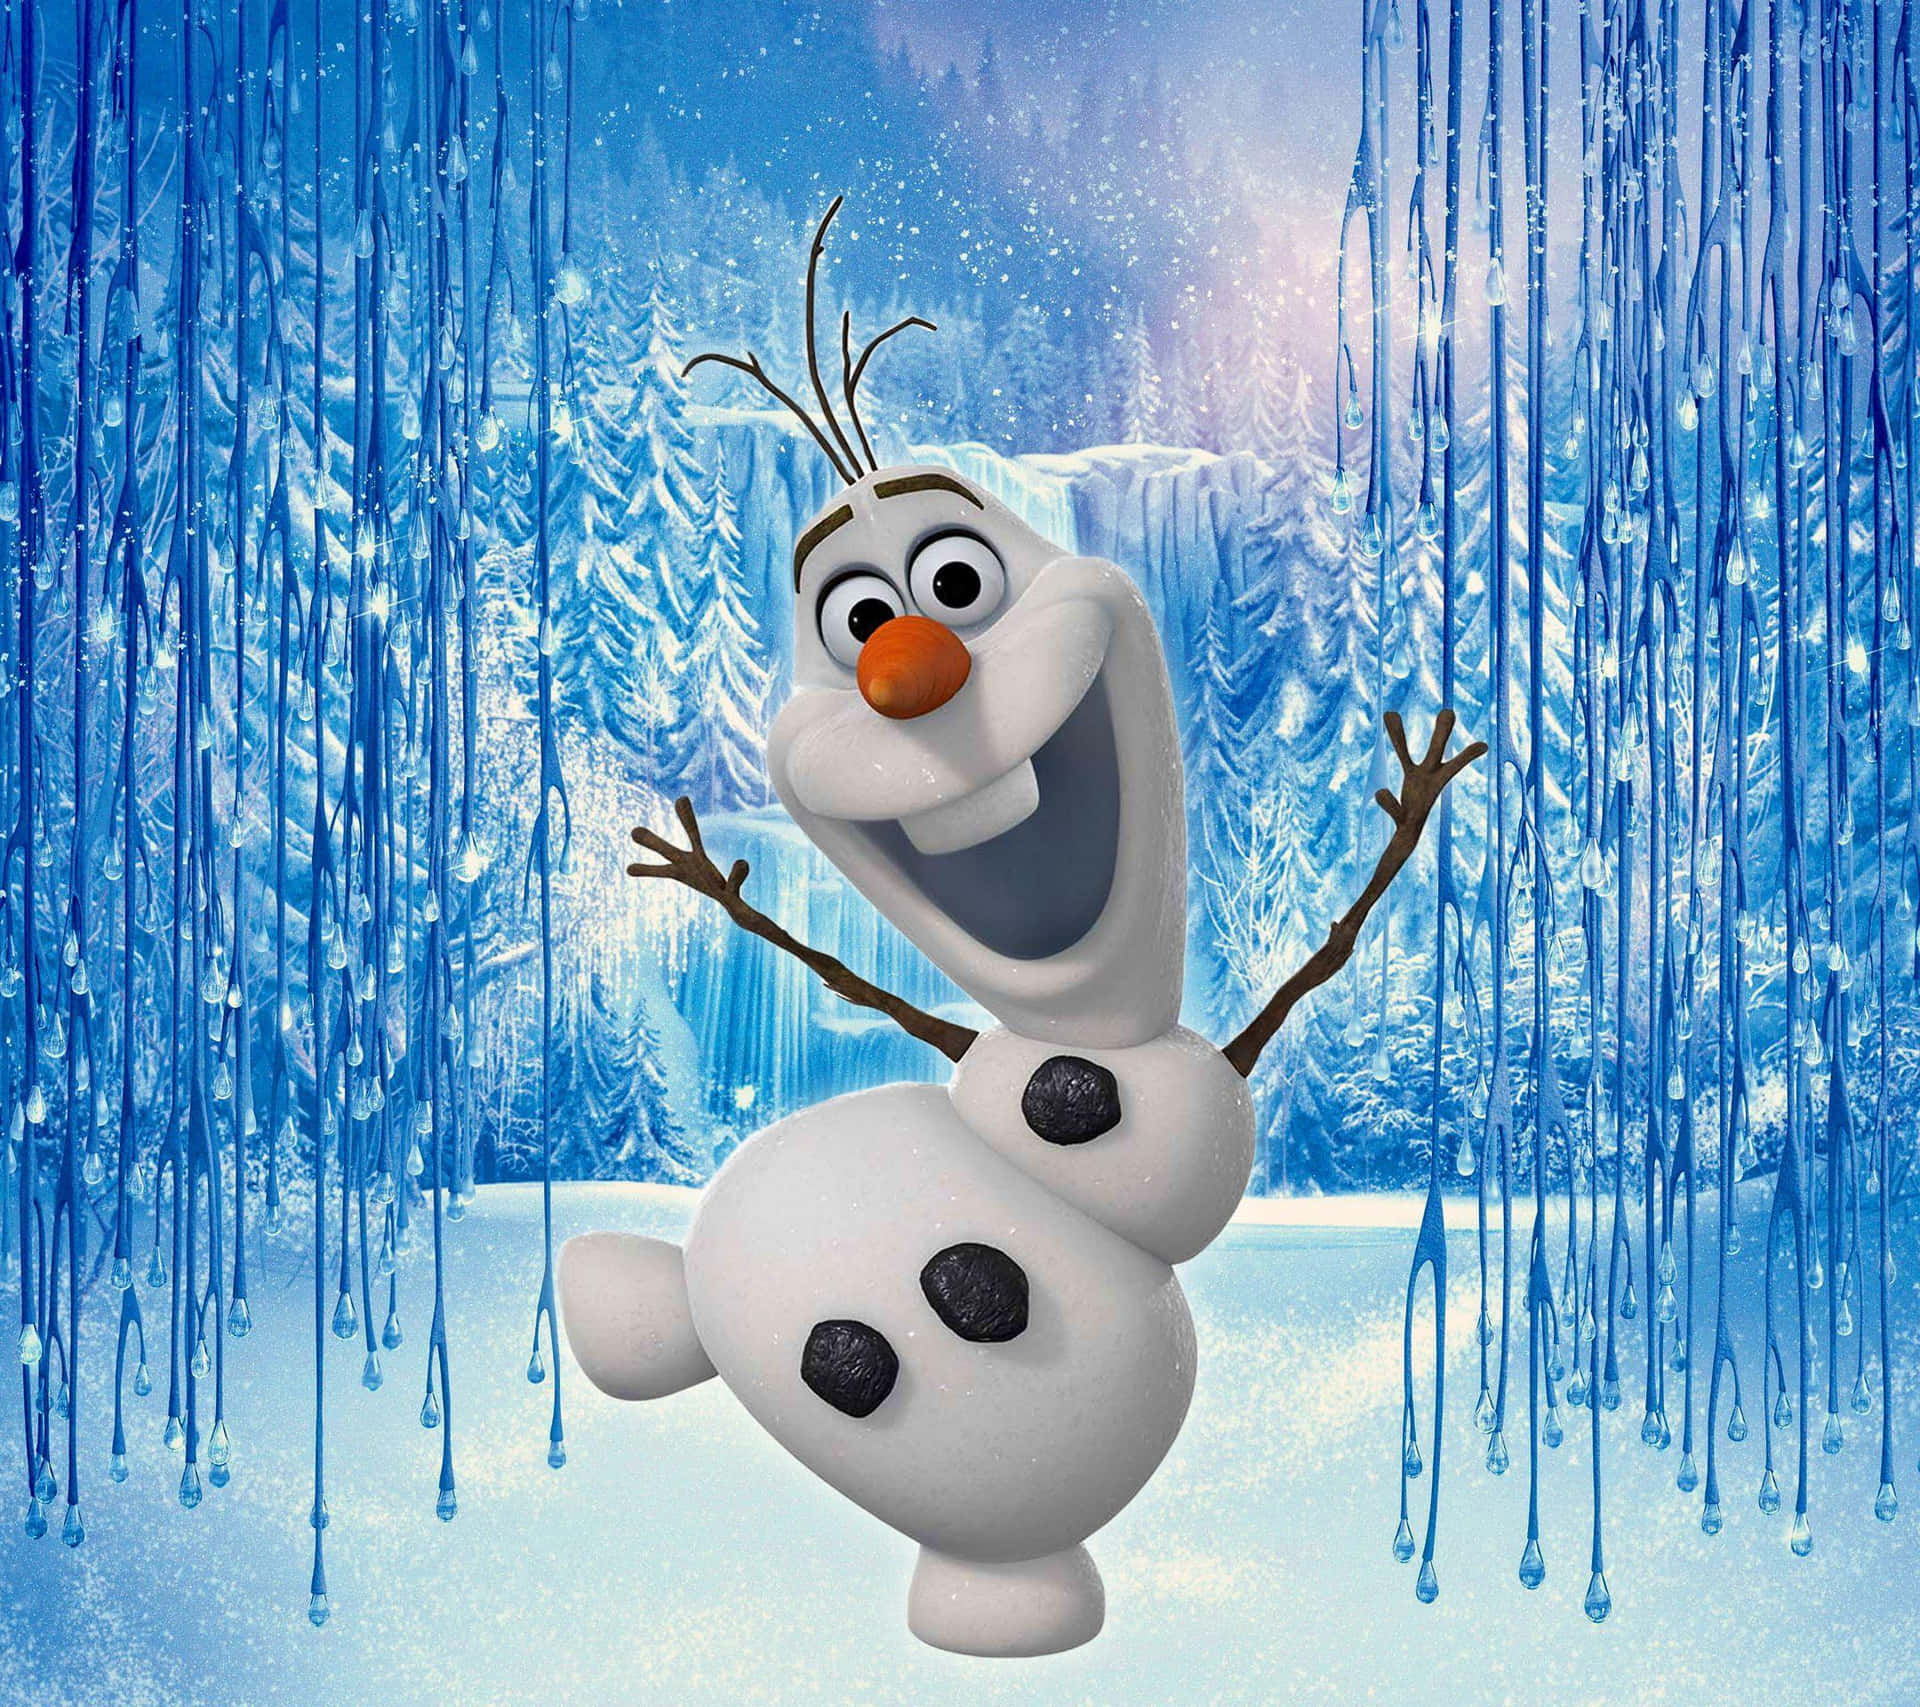 Life's sweeter when you share it with a friend like Olaf! Wallpaper